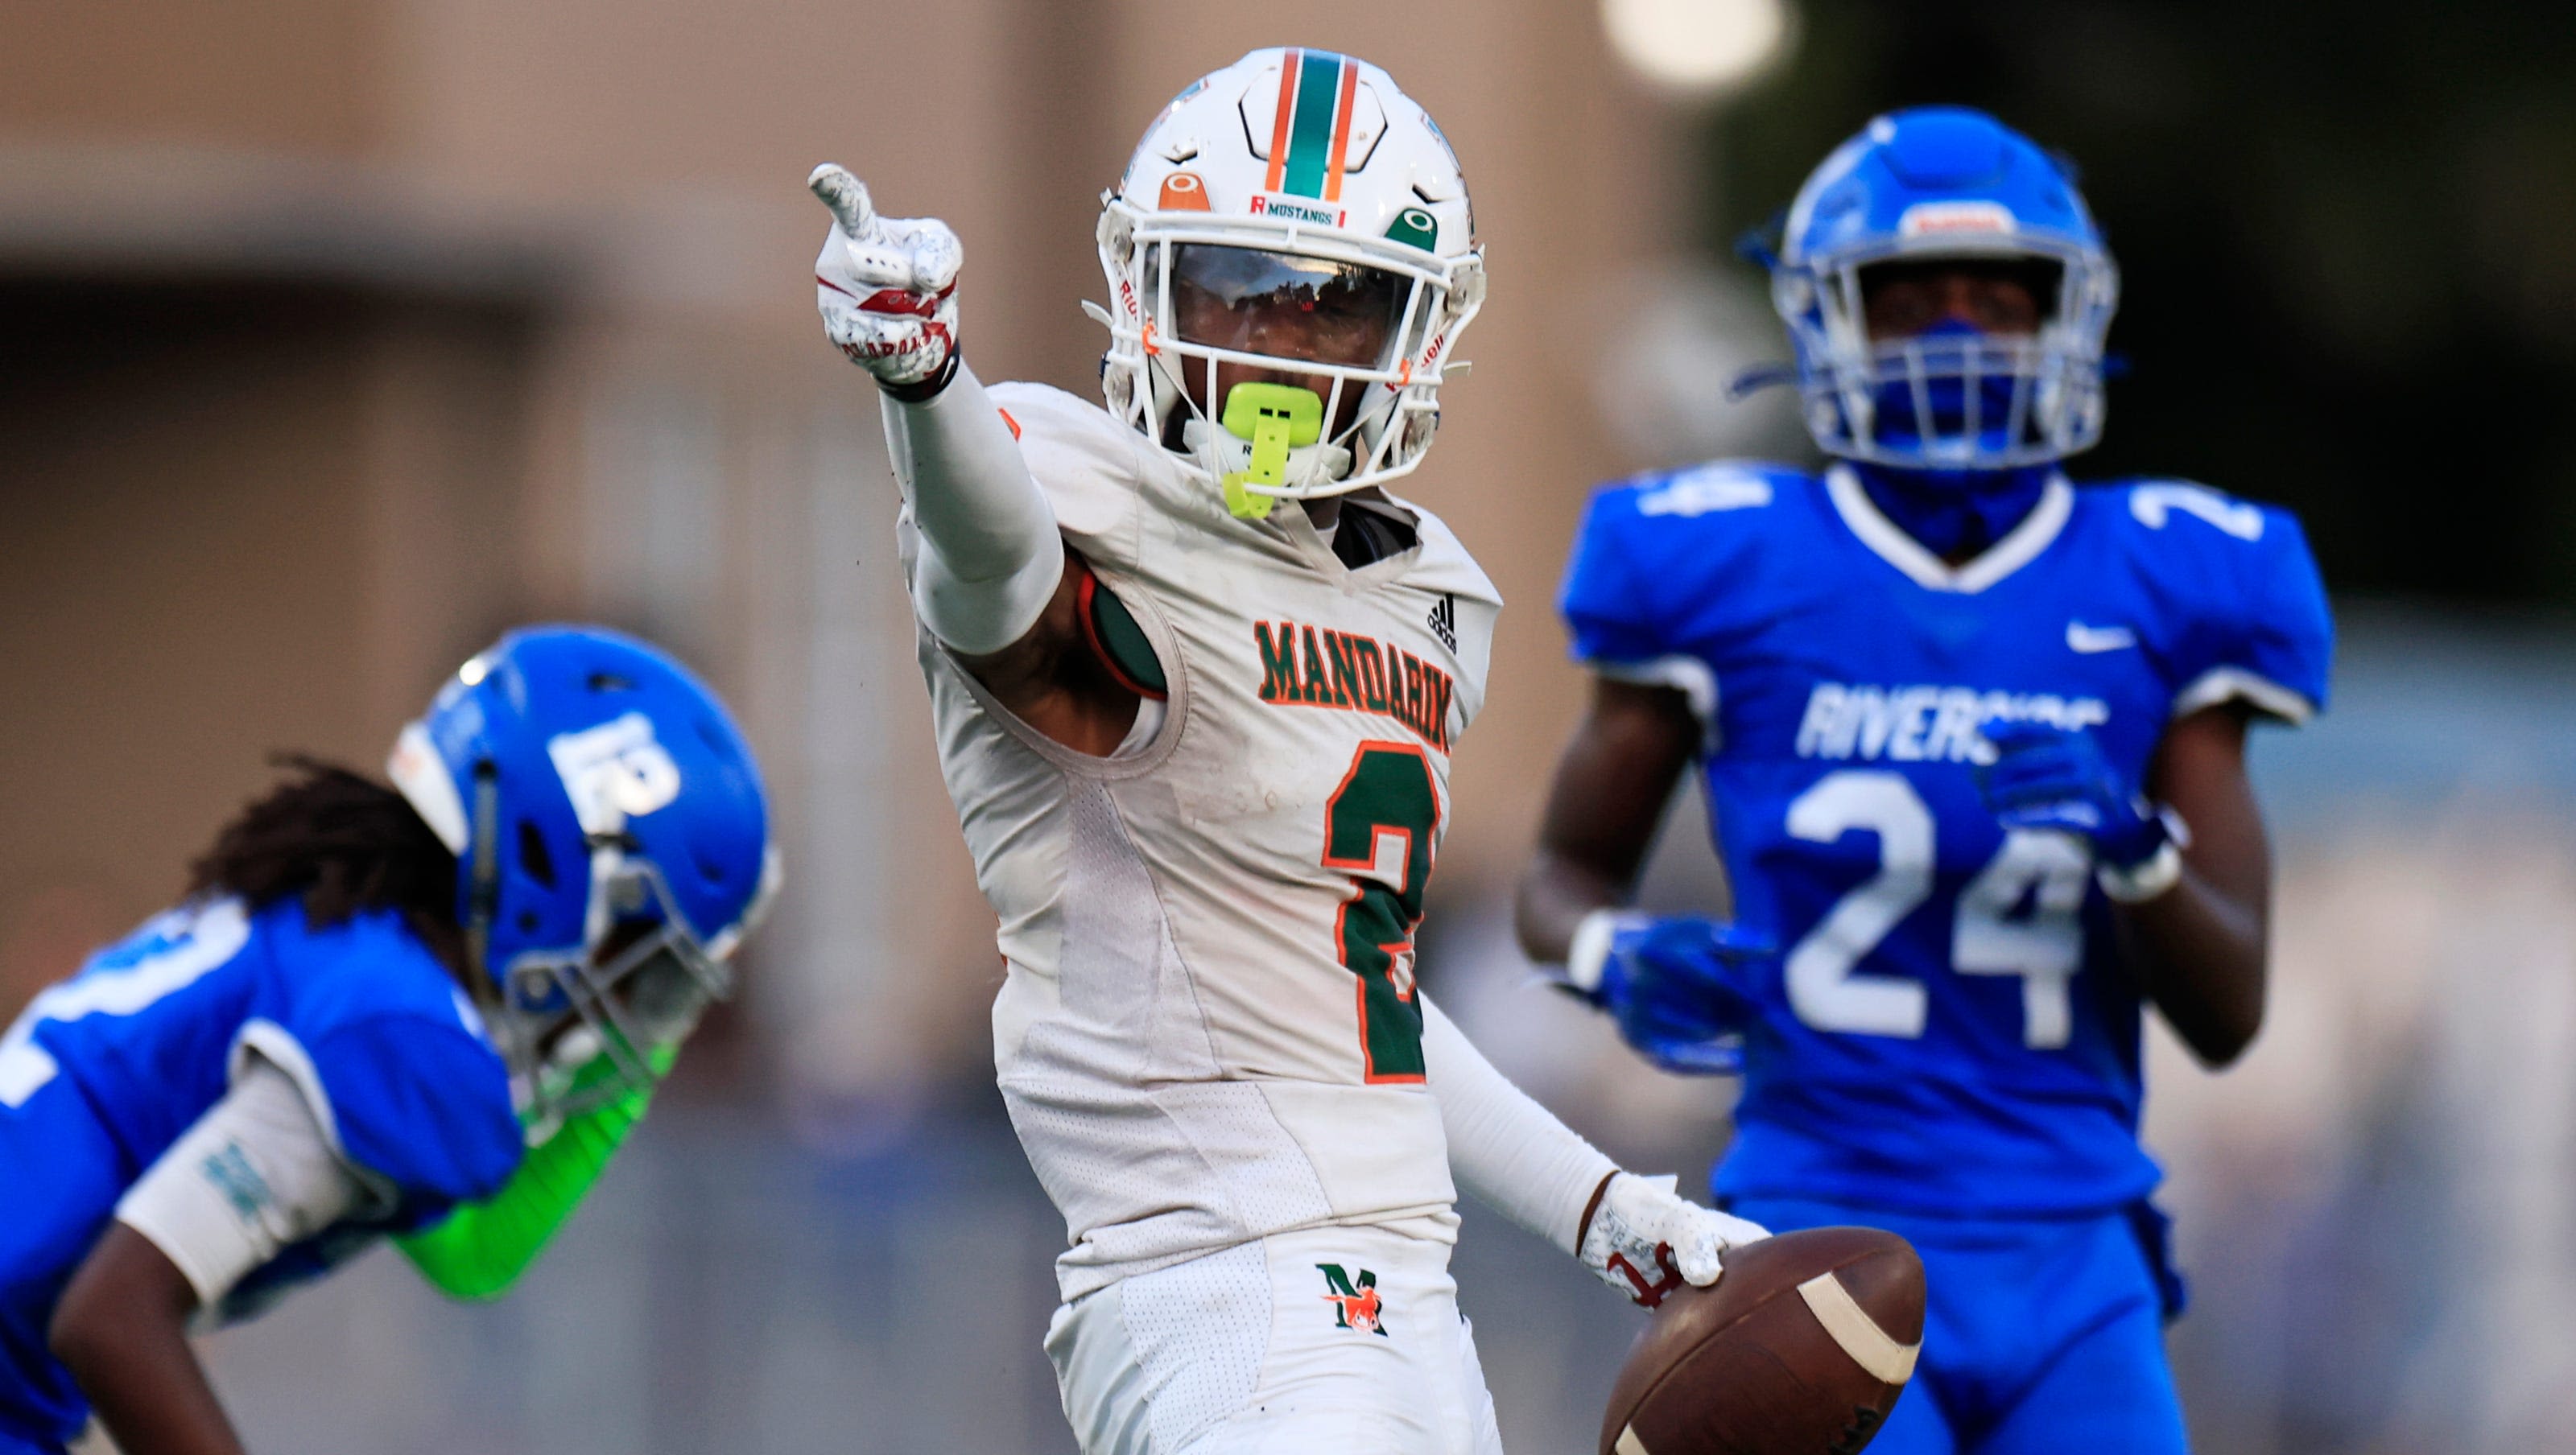 Florida's first high school NIL deal? Jacksonville recruit first to gain from FHSAA vote